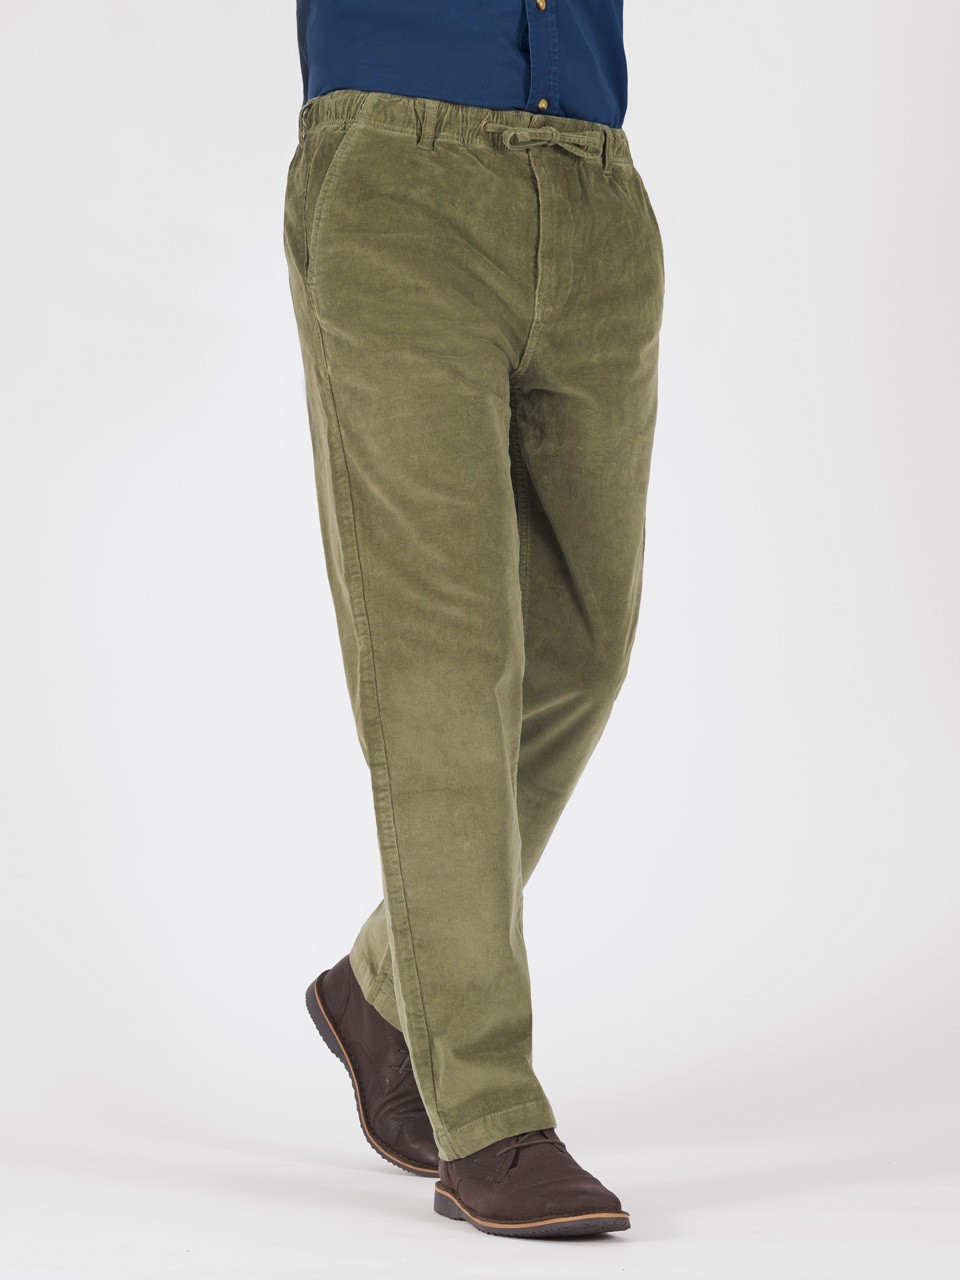 Buy Peter England Men Green Slim Fit Corduroy Trousers - Trousers for Men  532422 | Myntra